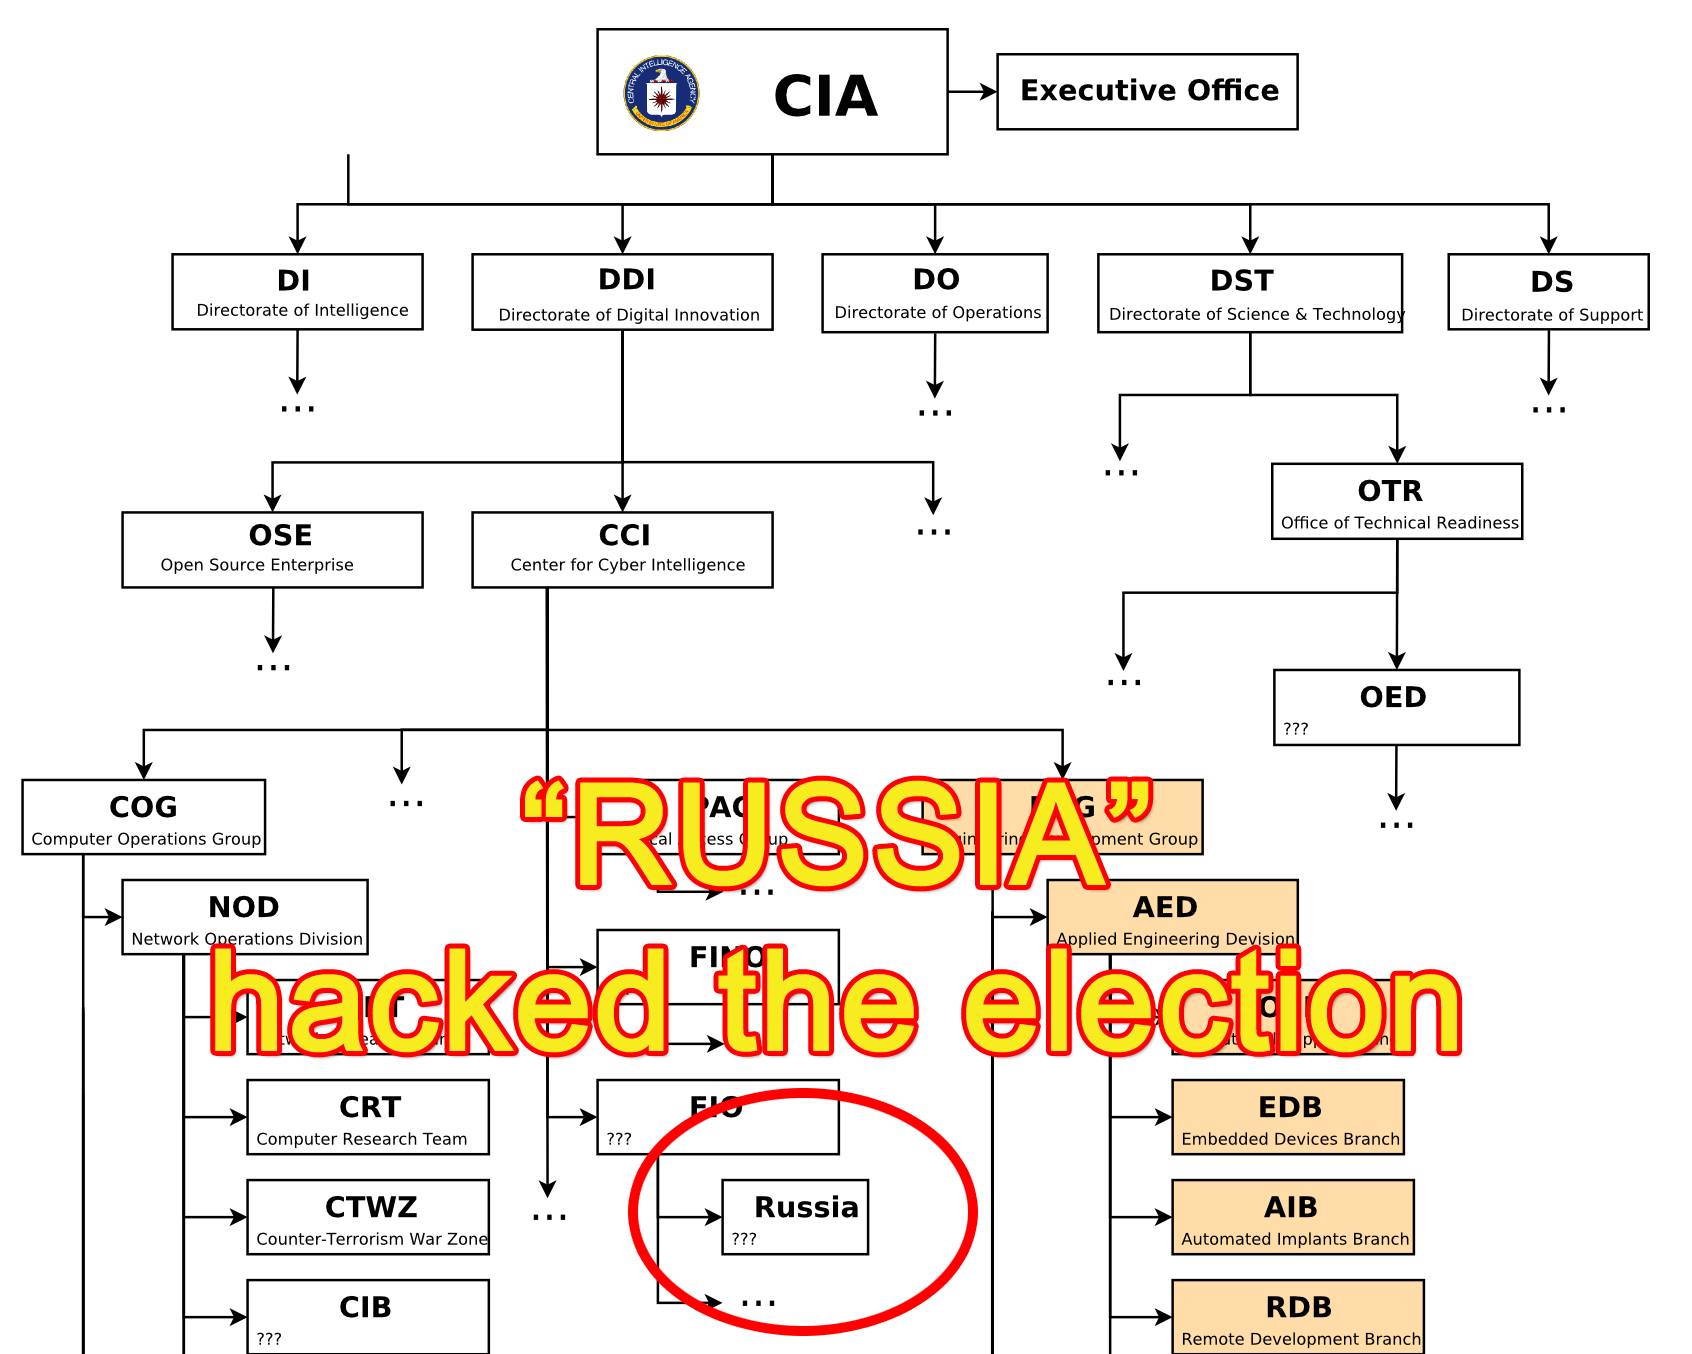 "Russia" hacked the election 